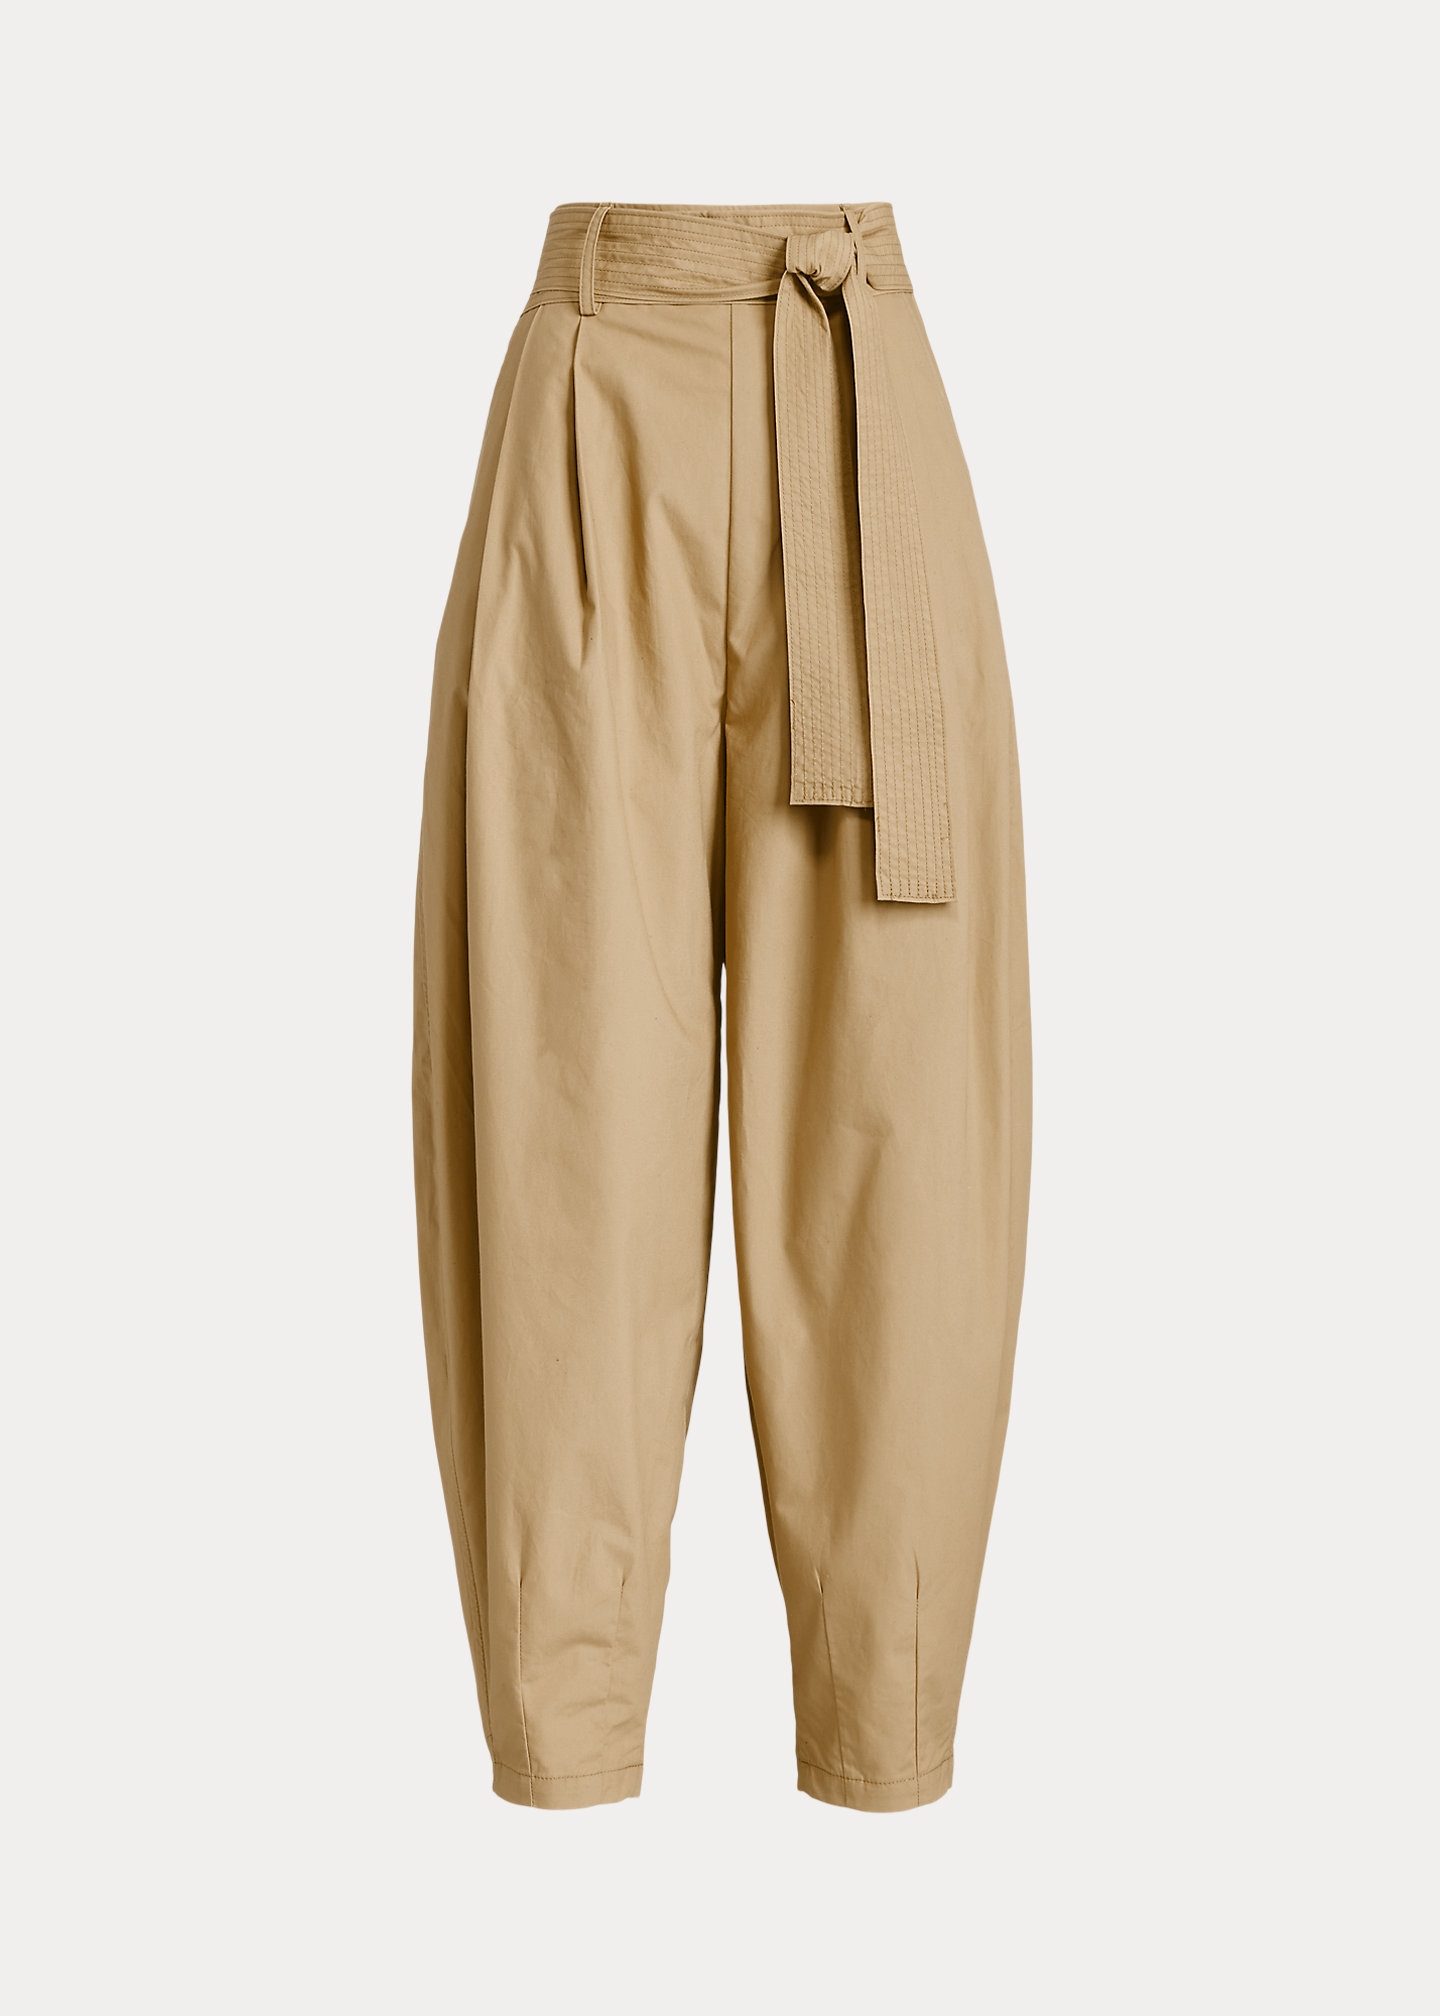 25 Pairs of Premium Trousers to Try for Spring | Who What Wear UK